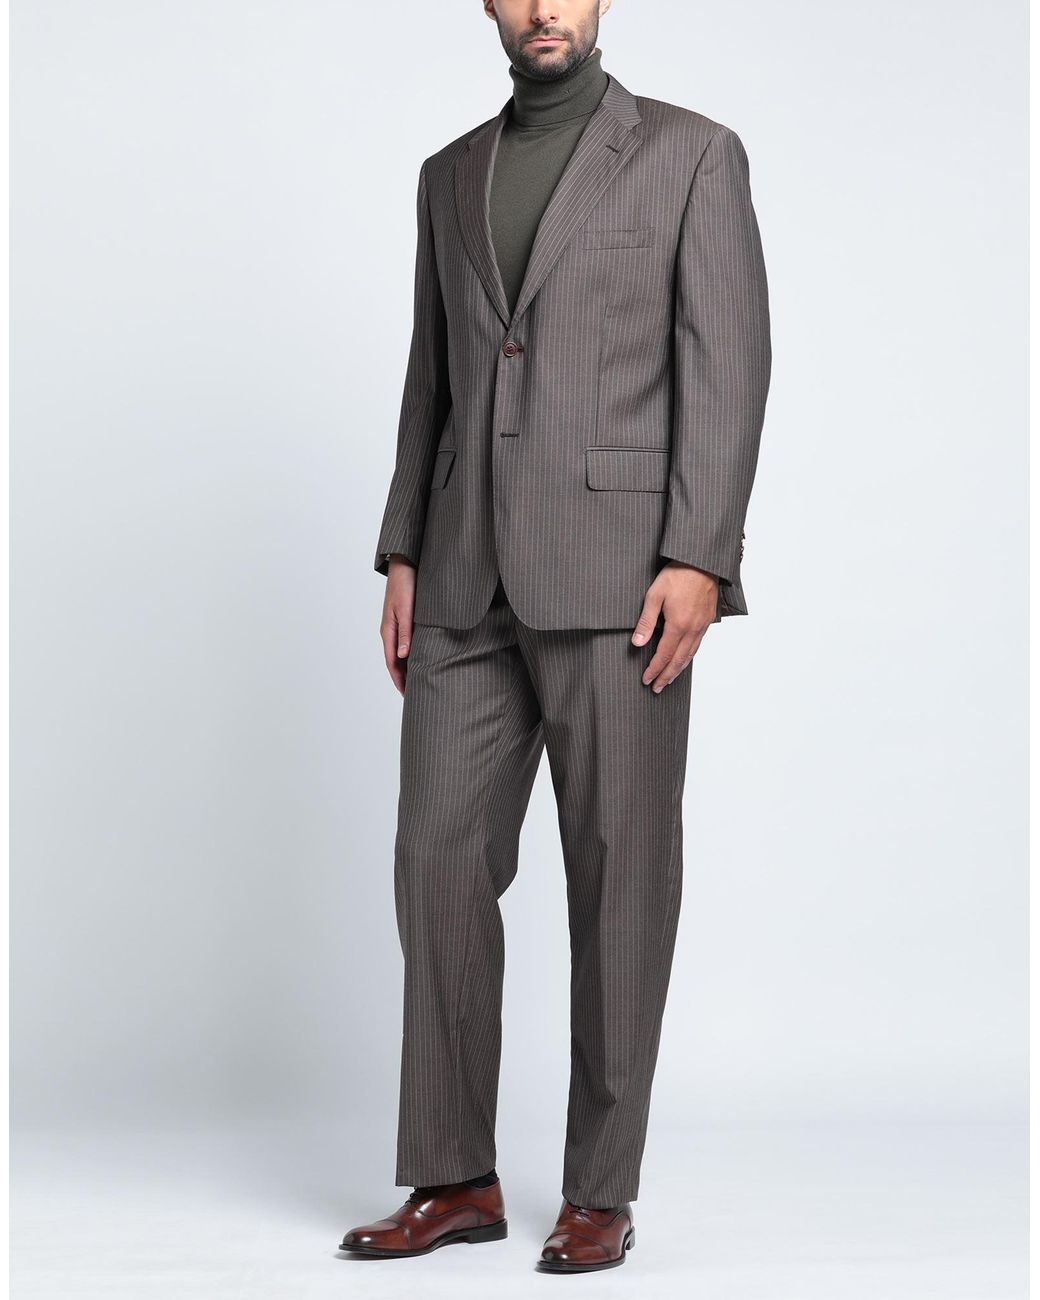 Domenico Tagliente Wool Suit in Steel Grey for Men Black Mens Clothing Suits Two-piece suits 